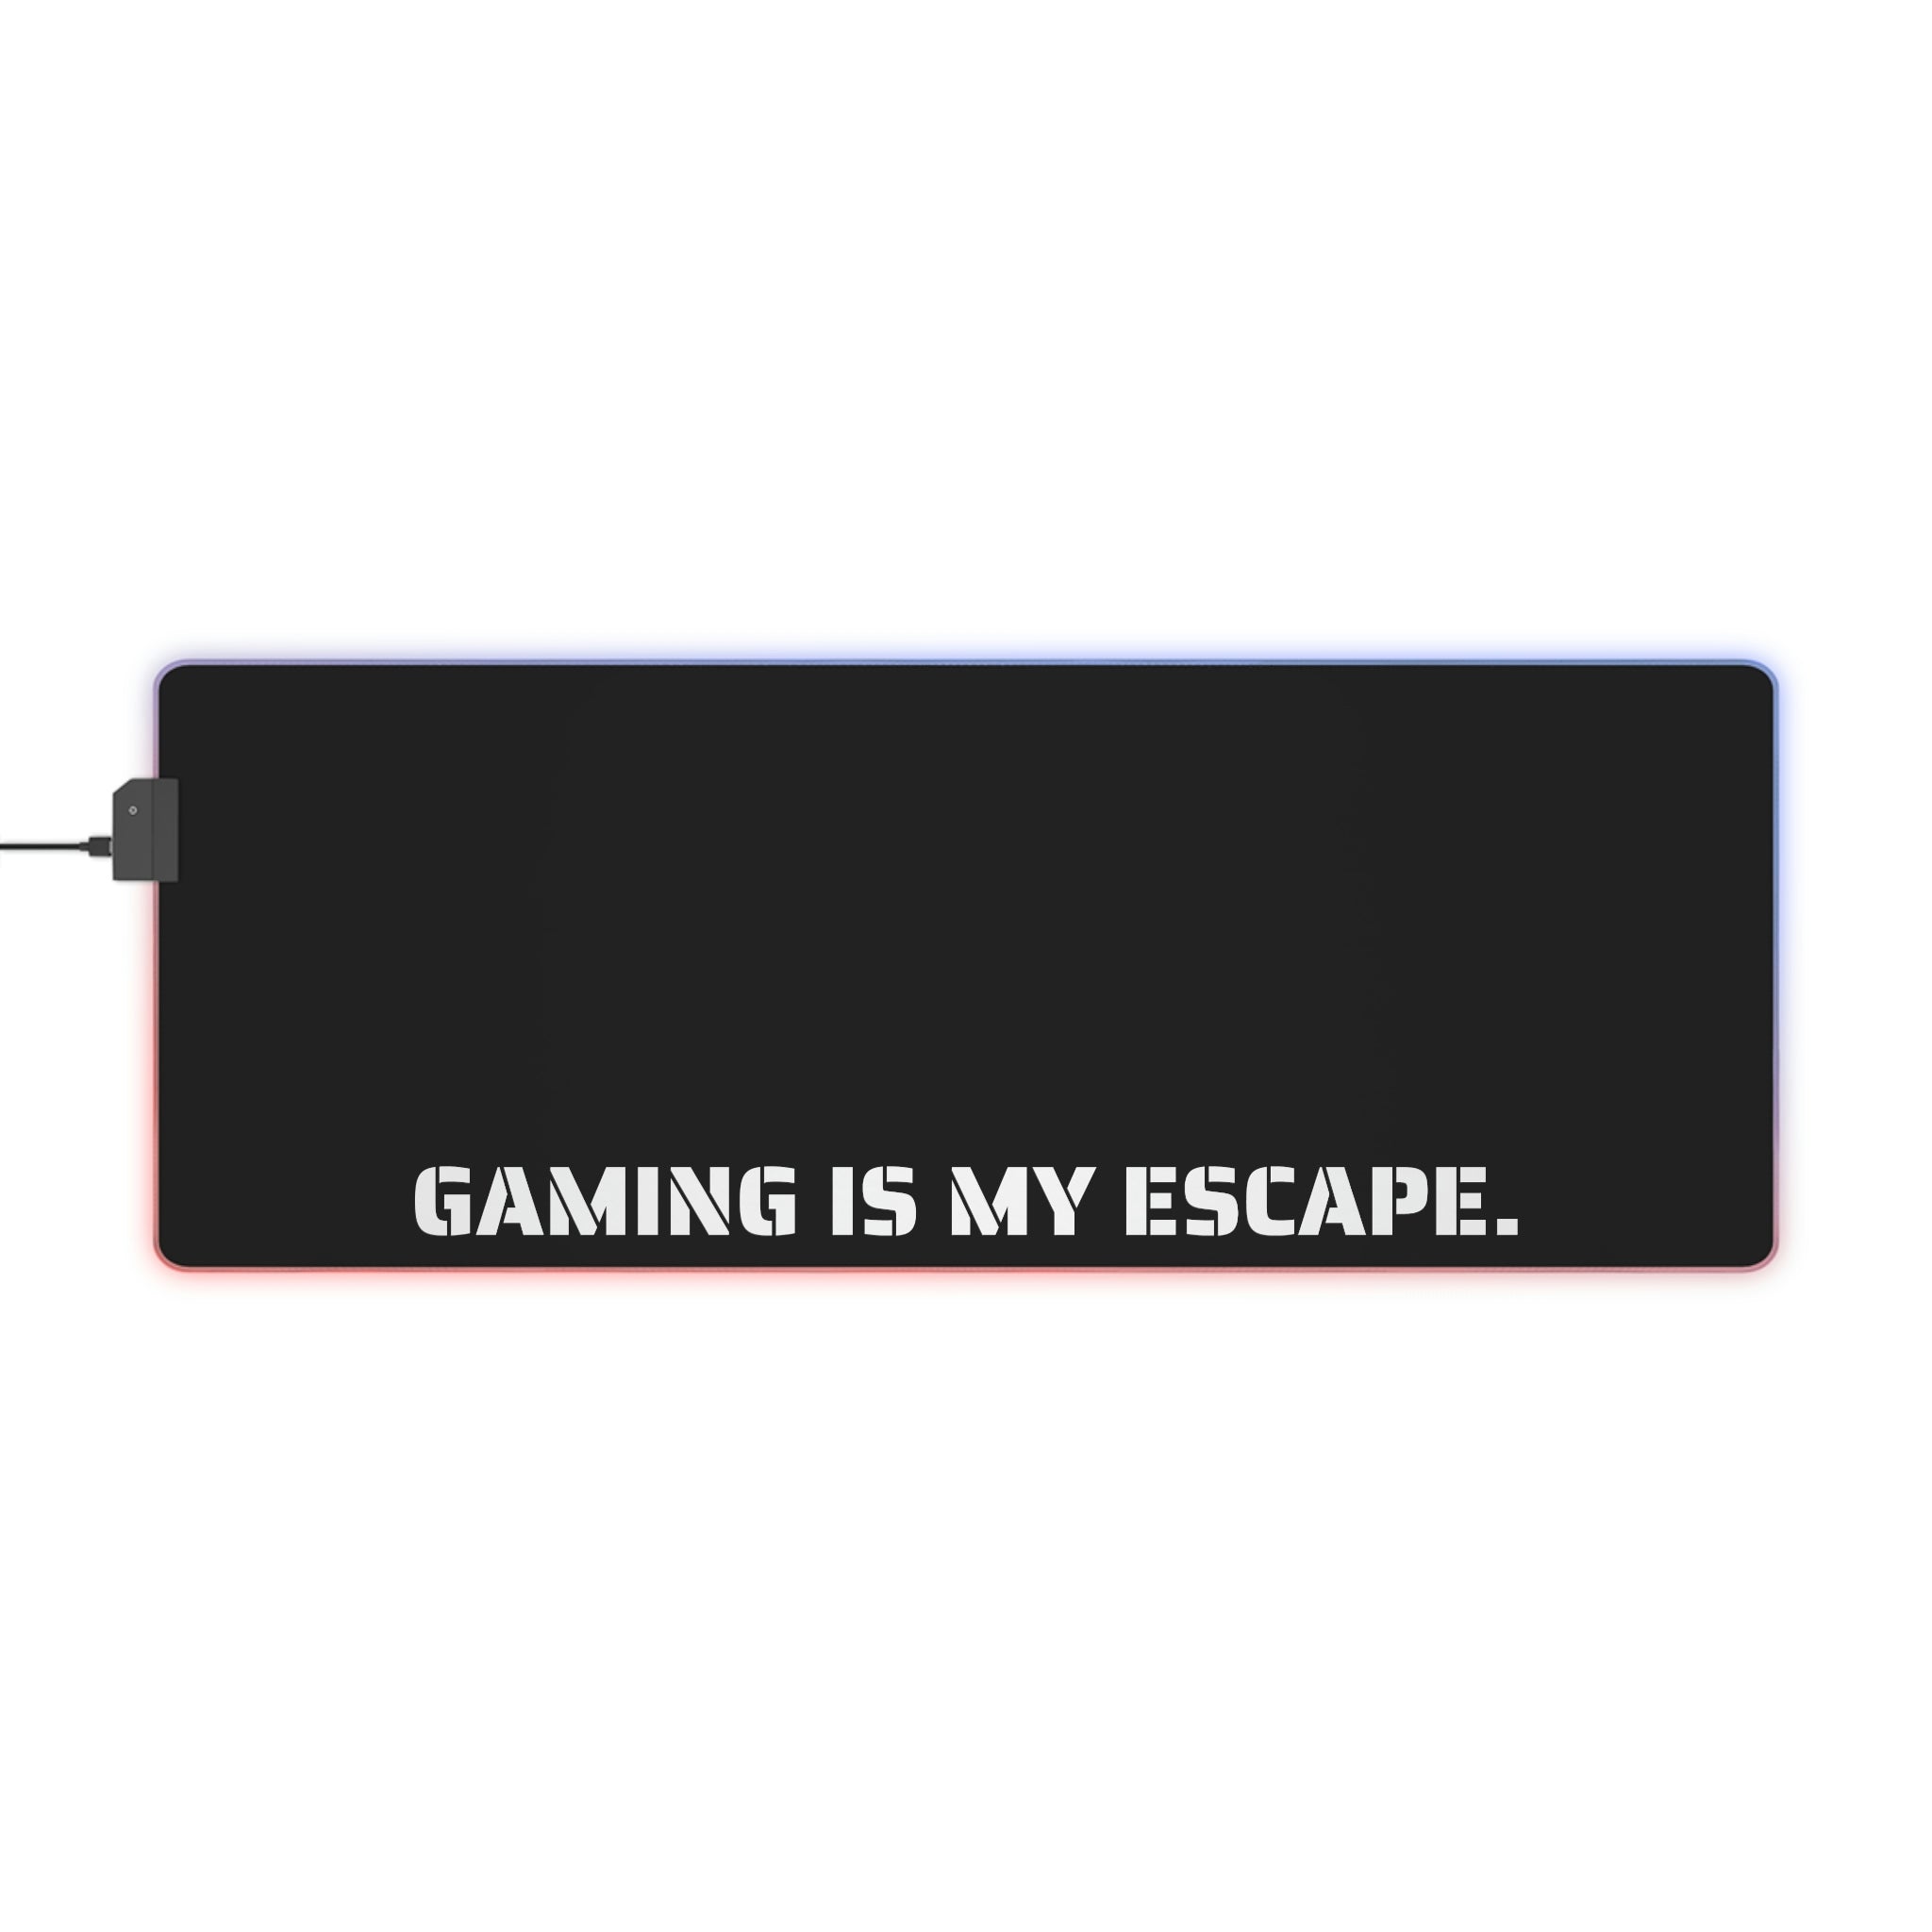 "Gaming is my escape." LED Gaming Mouse Pad